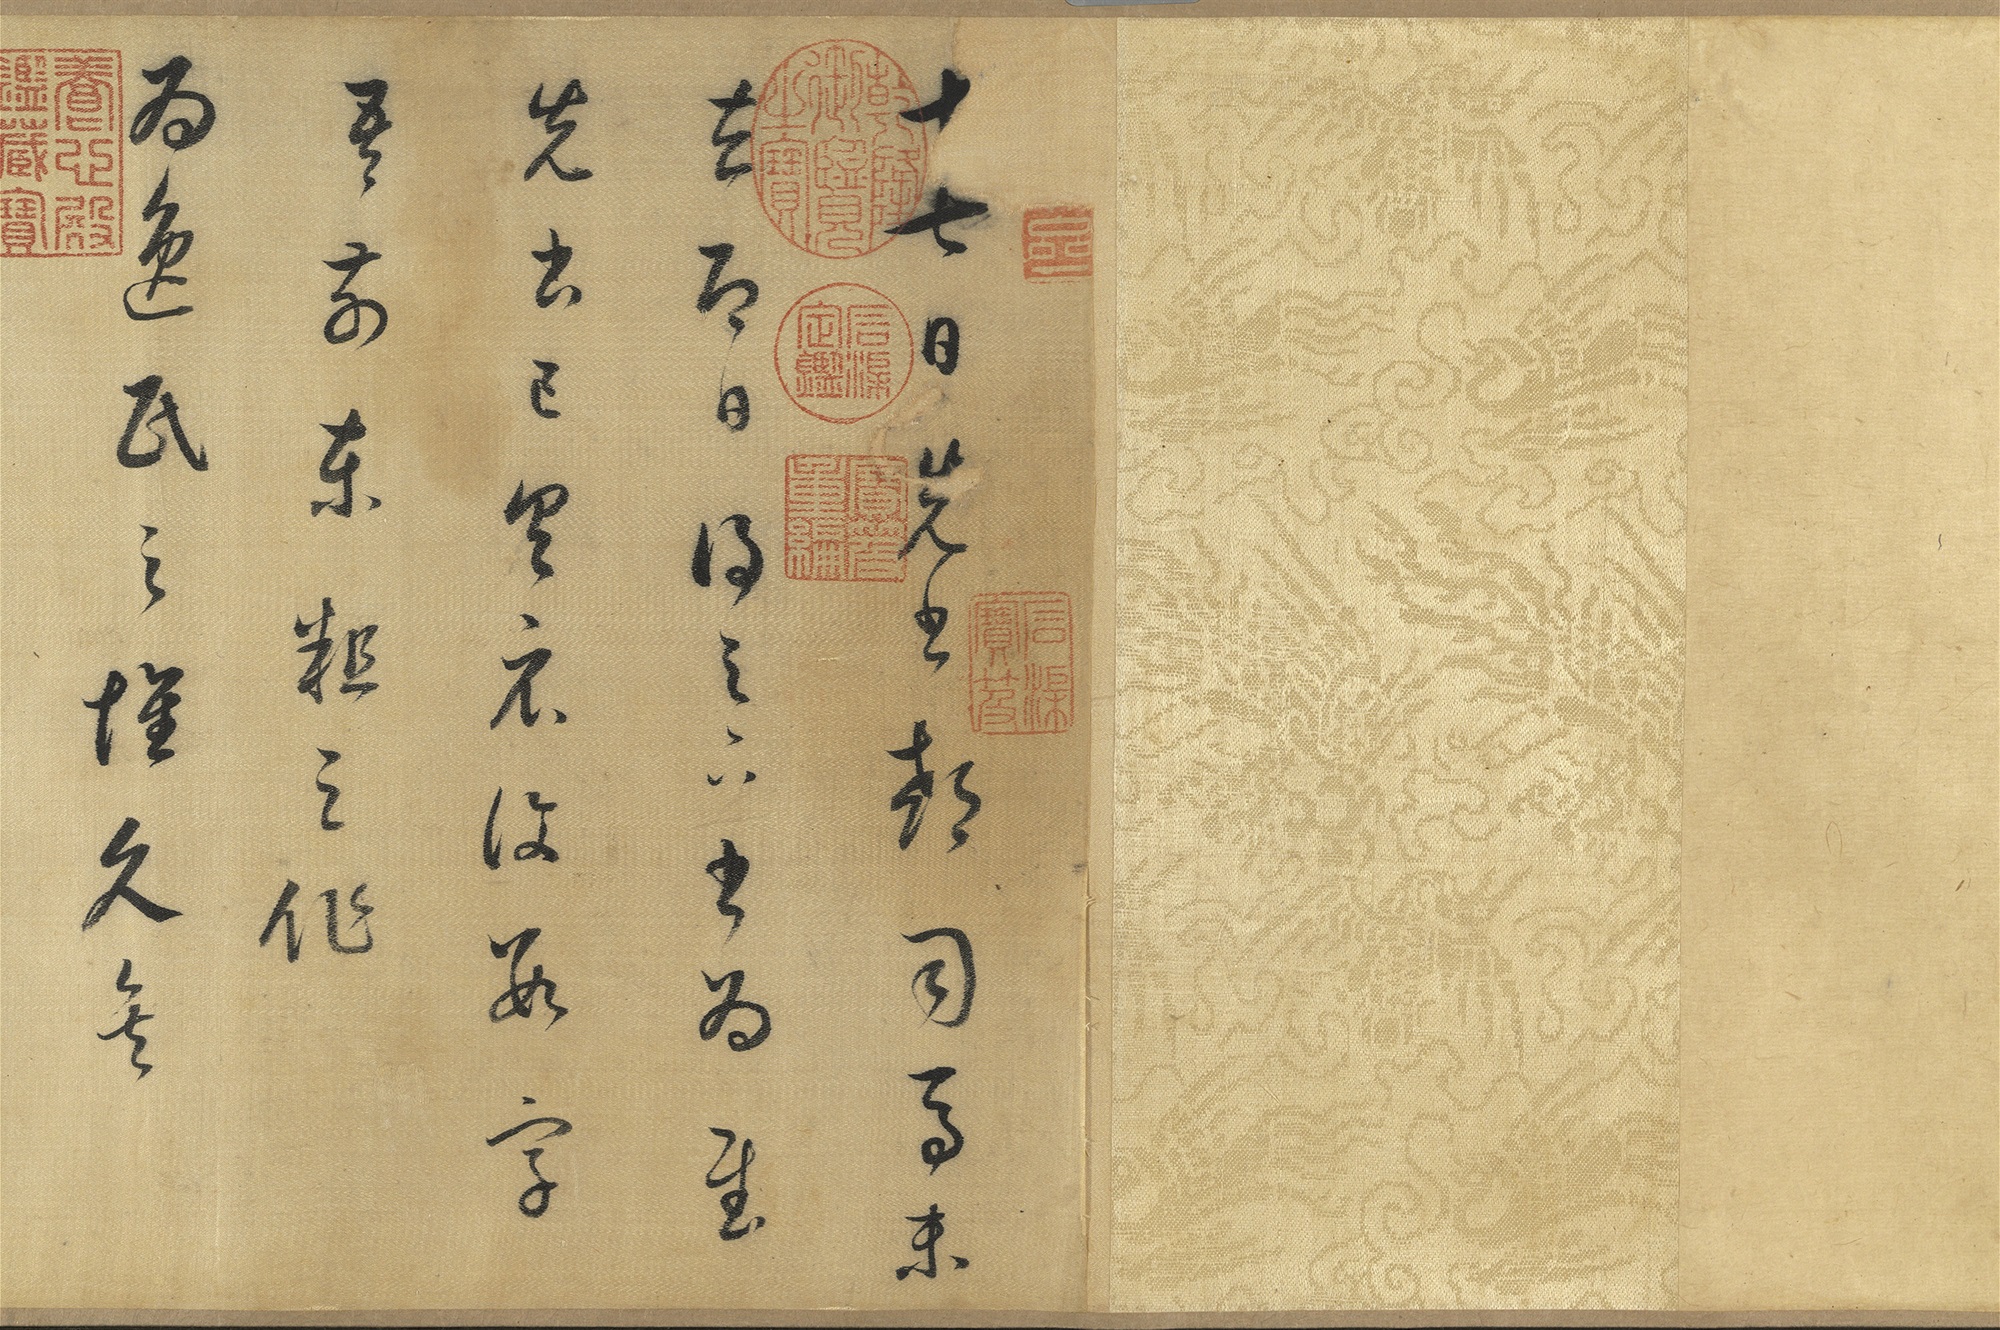 Copy of the “Seventeen Inscription” Dong Qichang, Ming dynasty